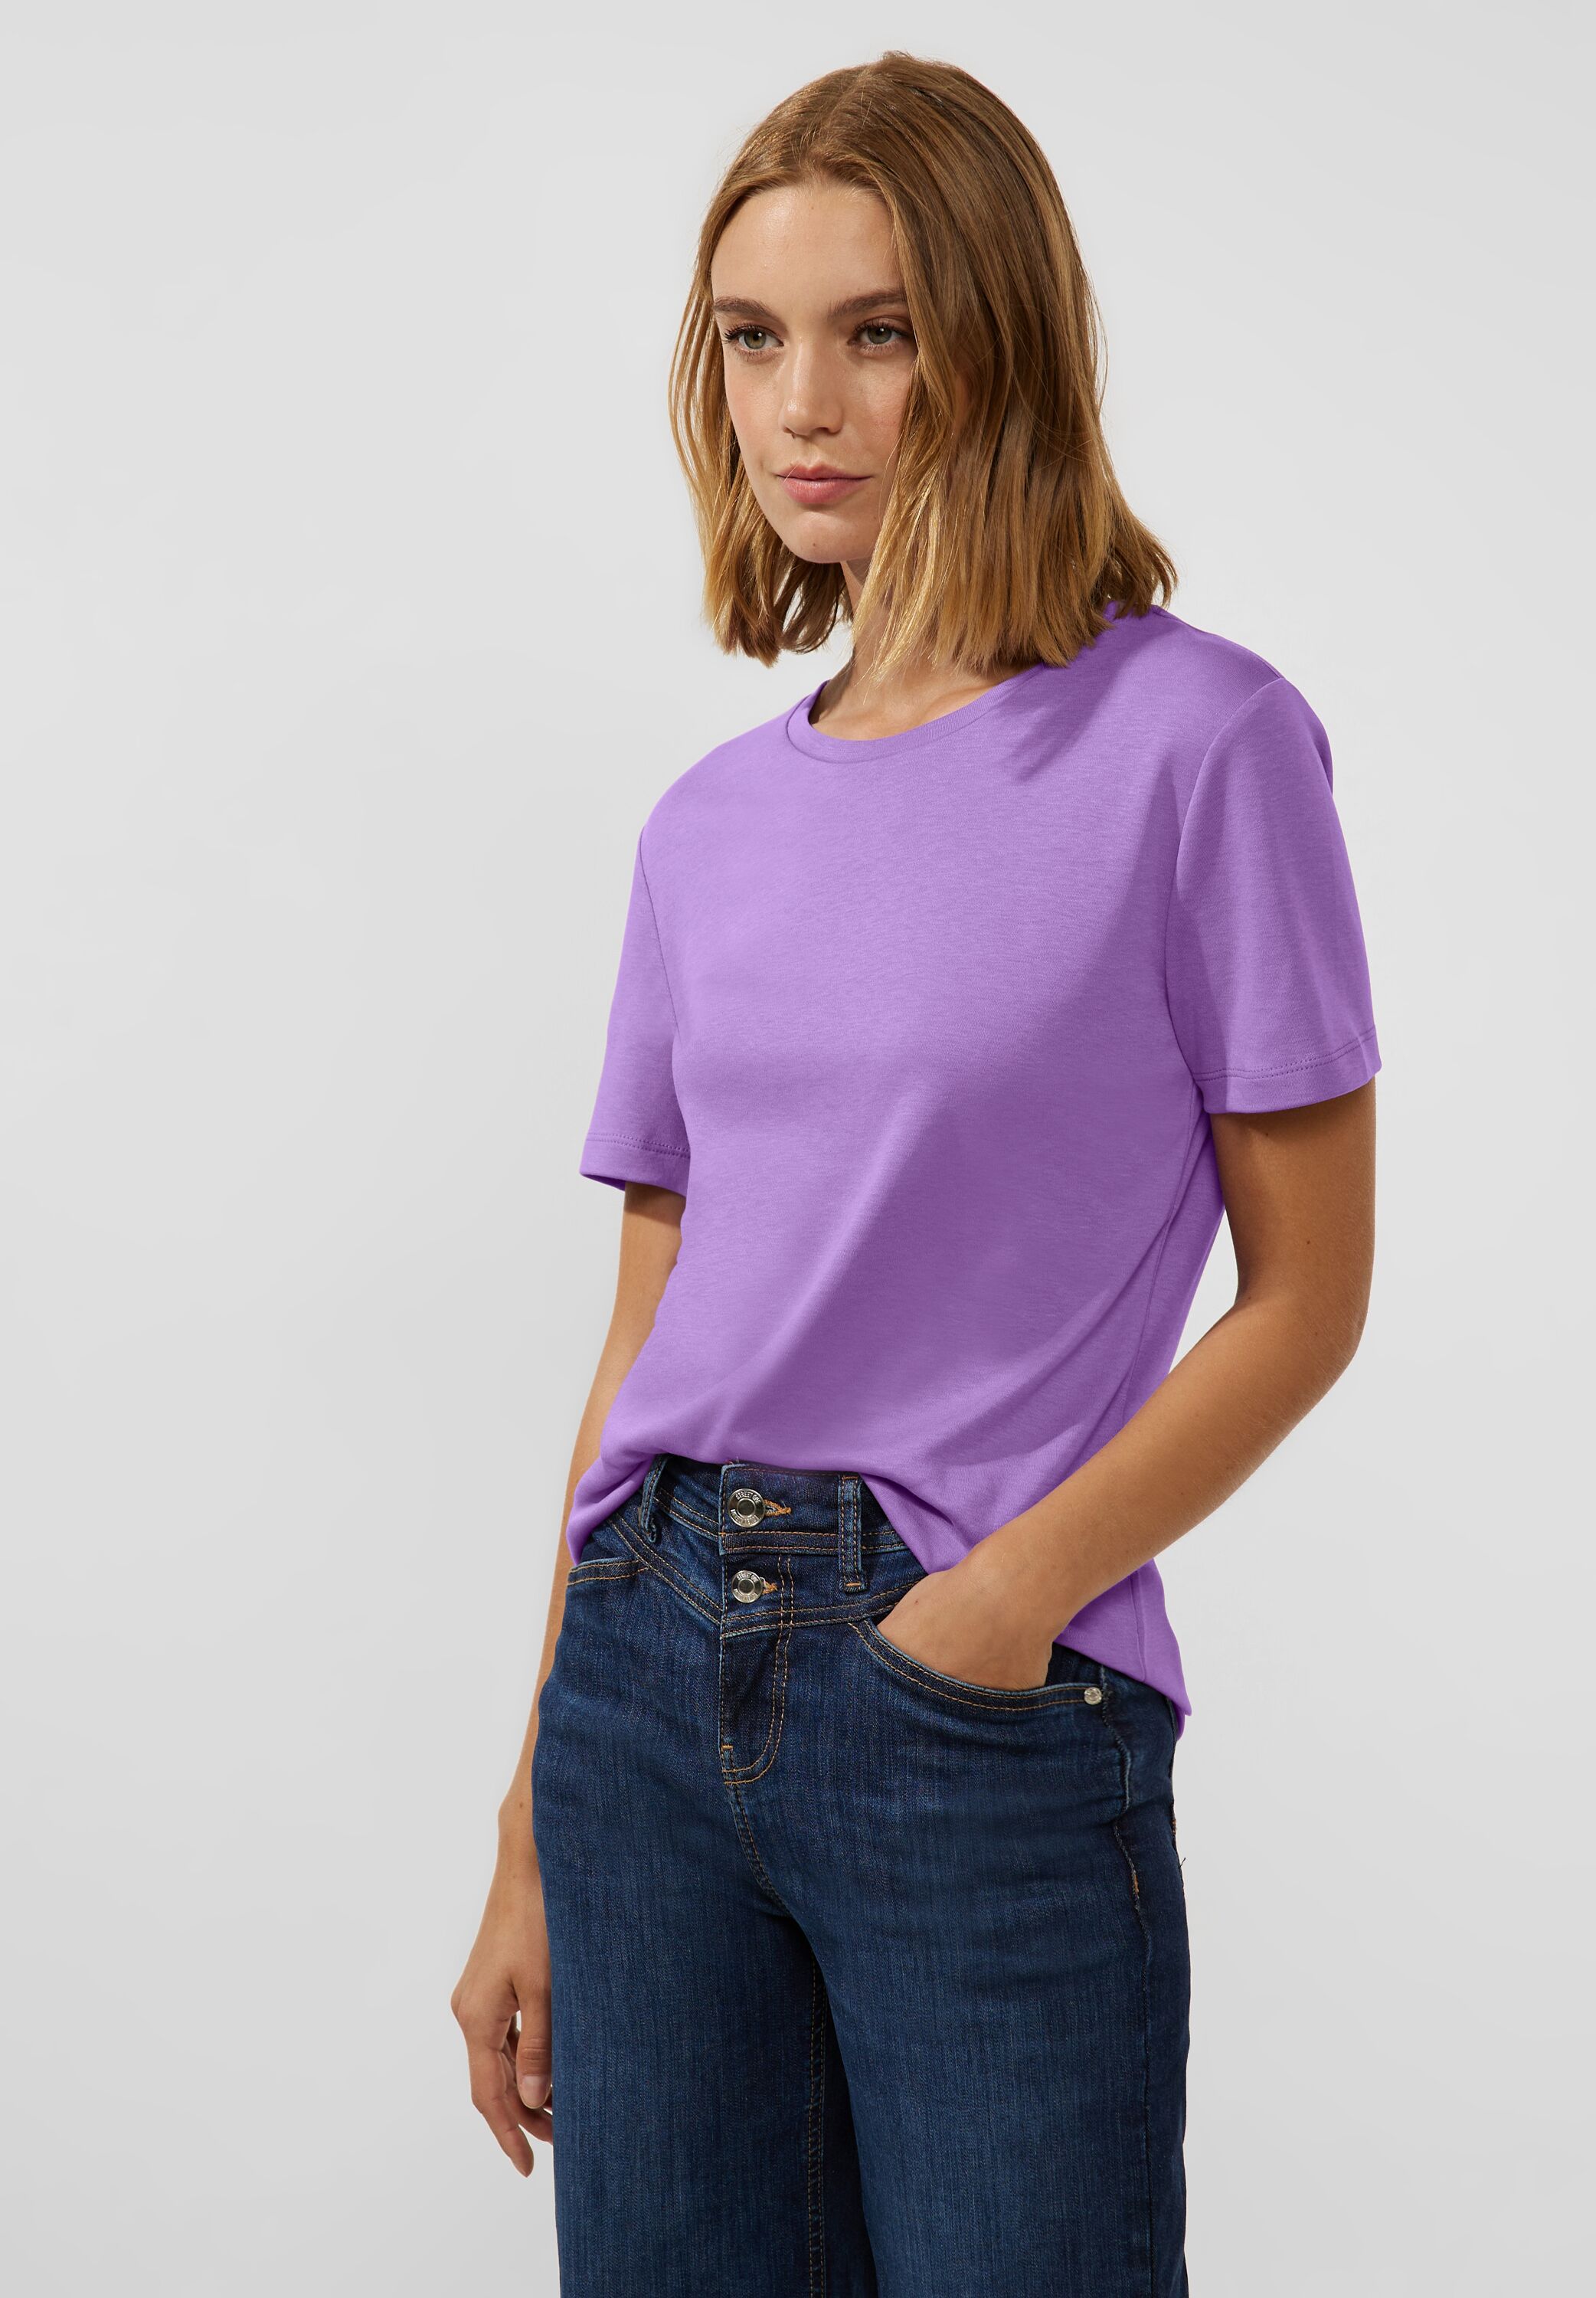 Street One T-Shirt in im Lilac Mode Lupine reduziert SALE CONCEPT - A320321-15181